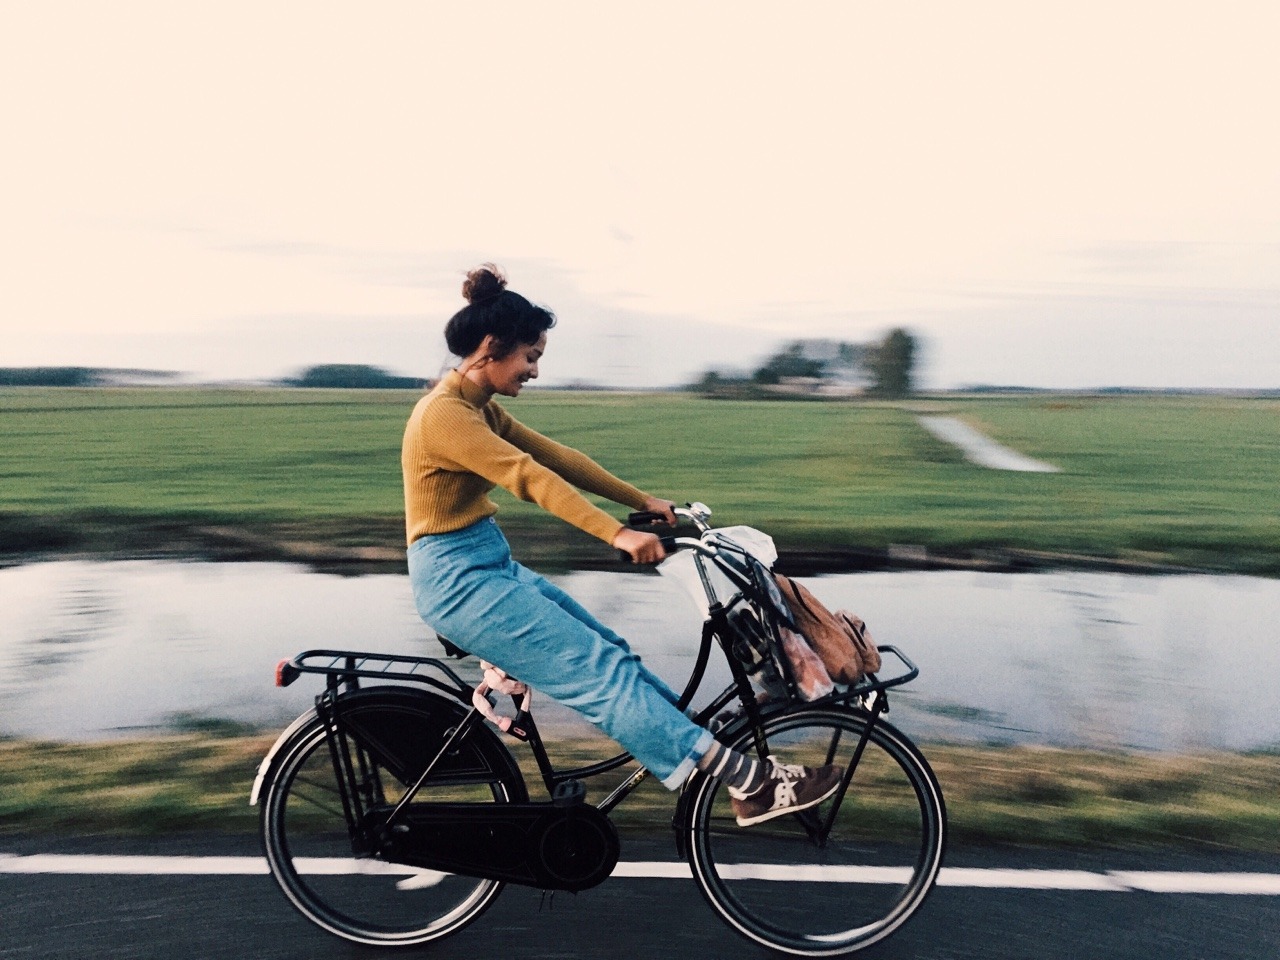 caseykaui:  My last bike ride in amsterdam, after afternoons in the city, it was